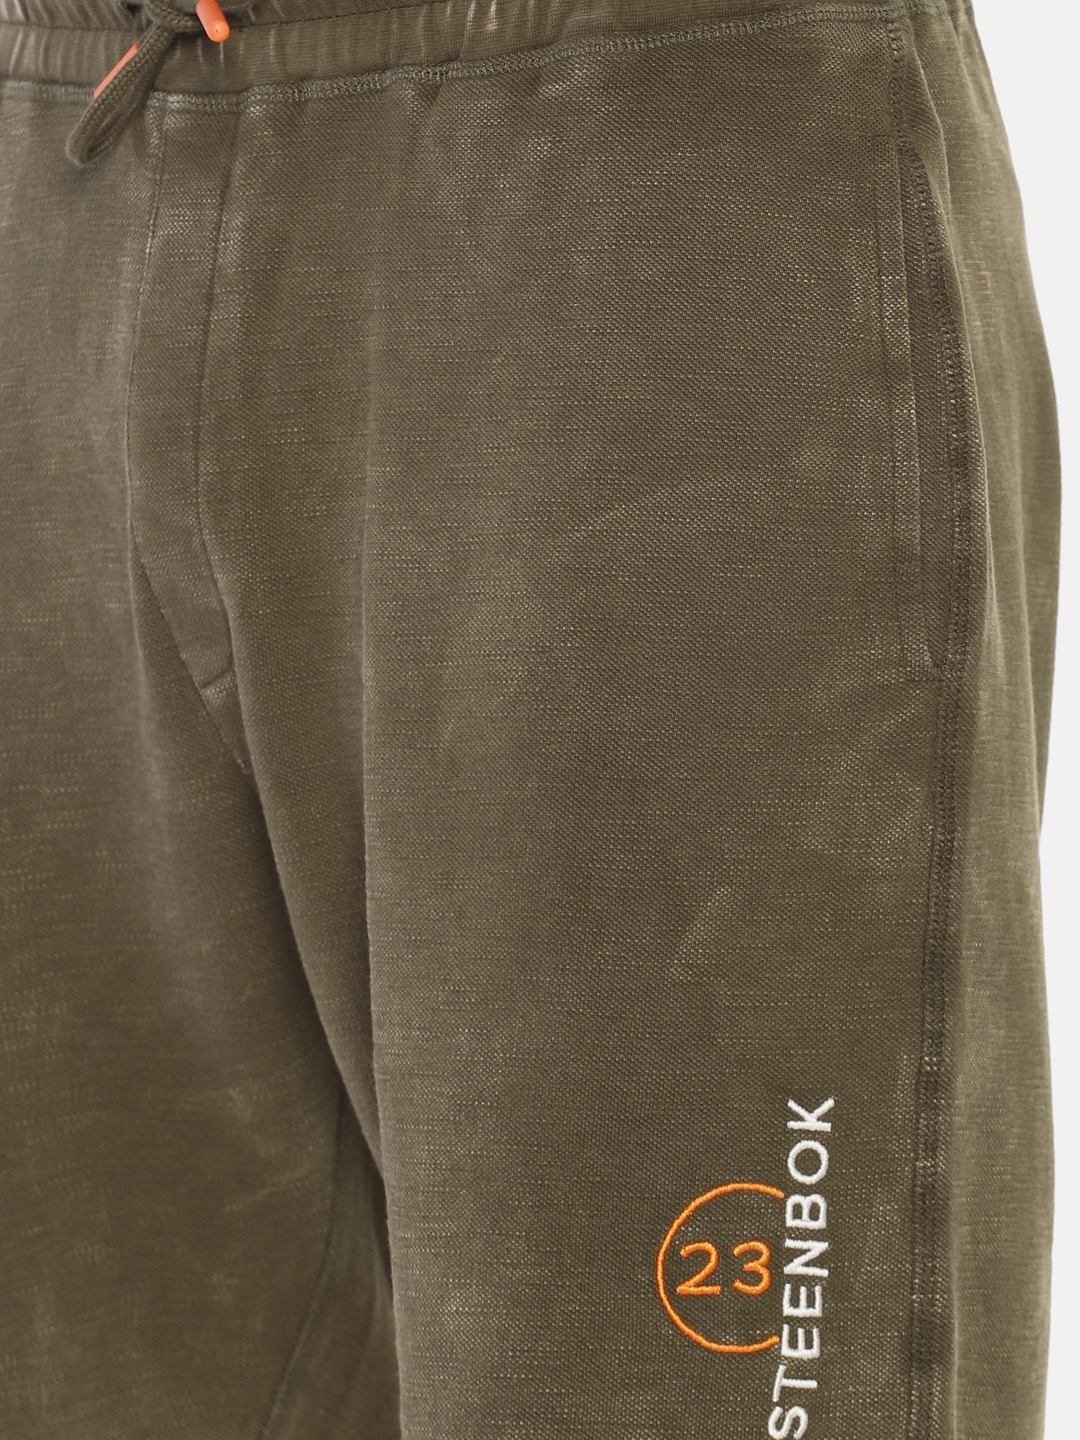 Steenbok | Men's Solid Washed Casual Shorts 4